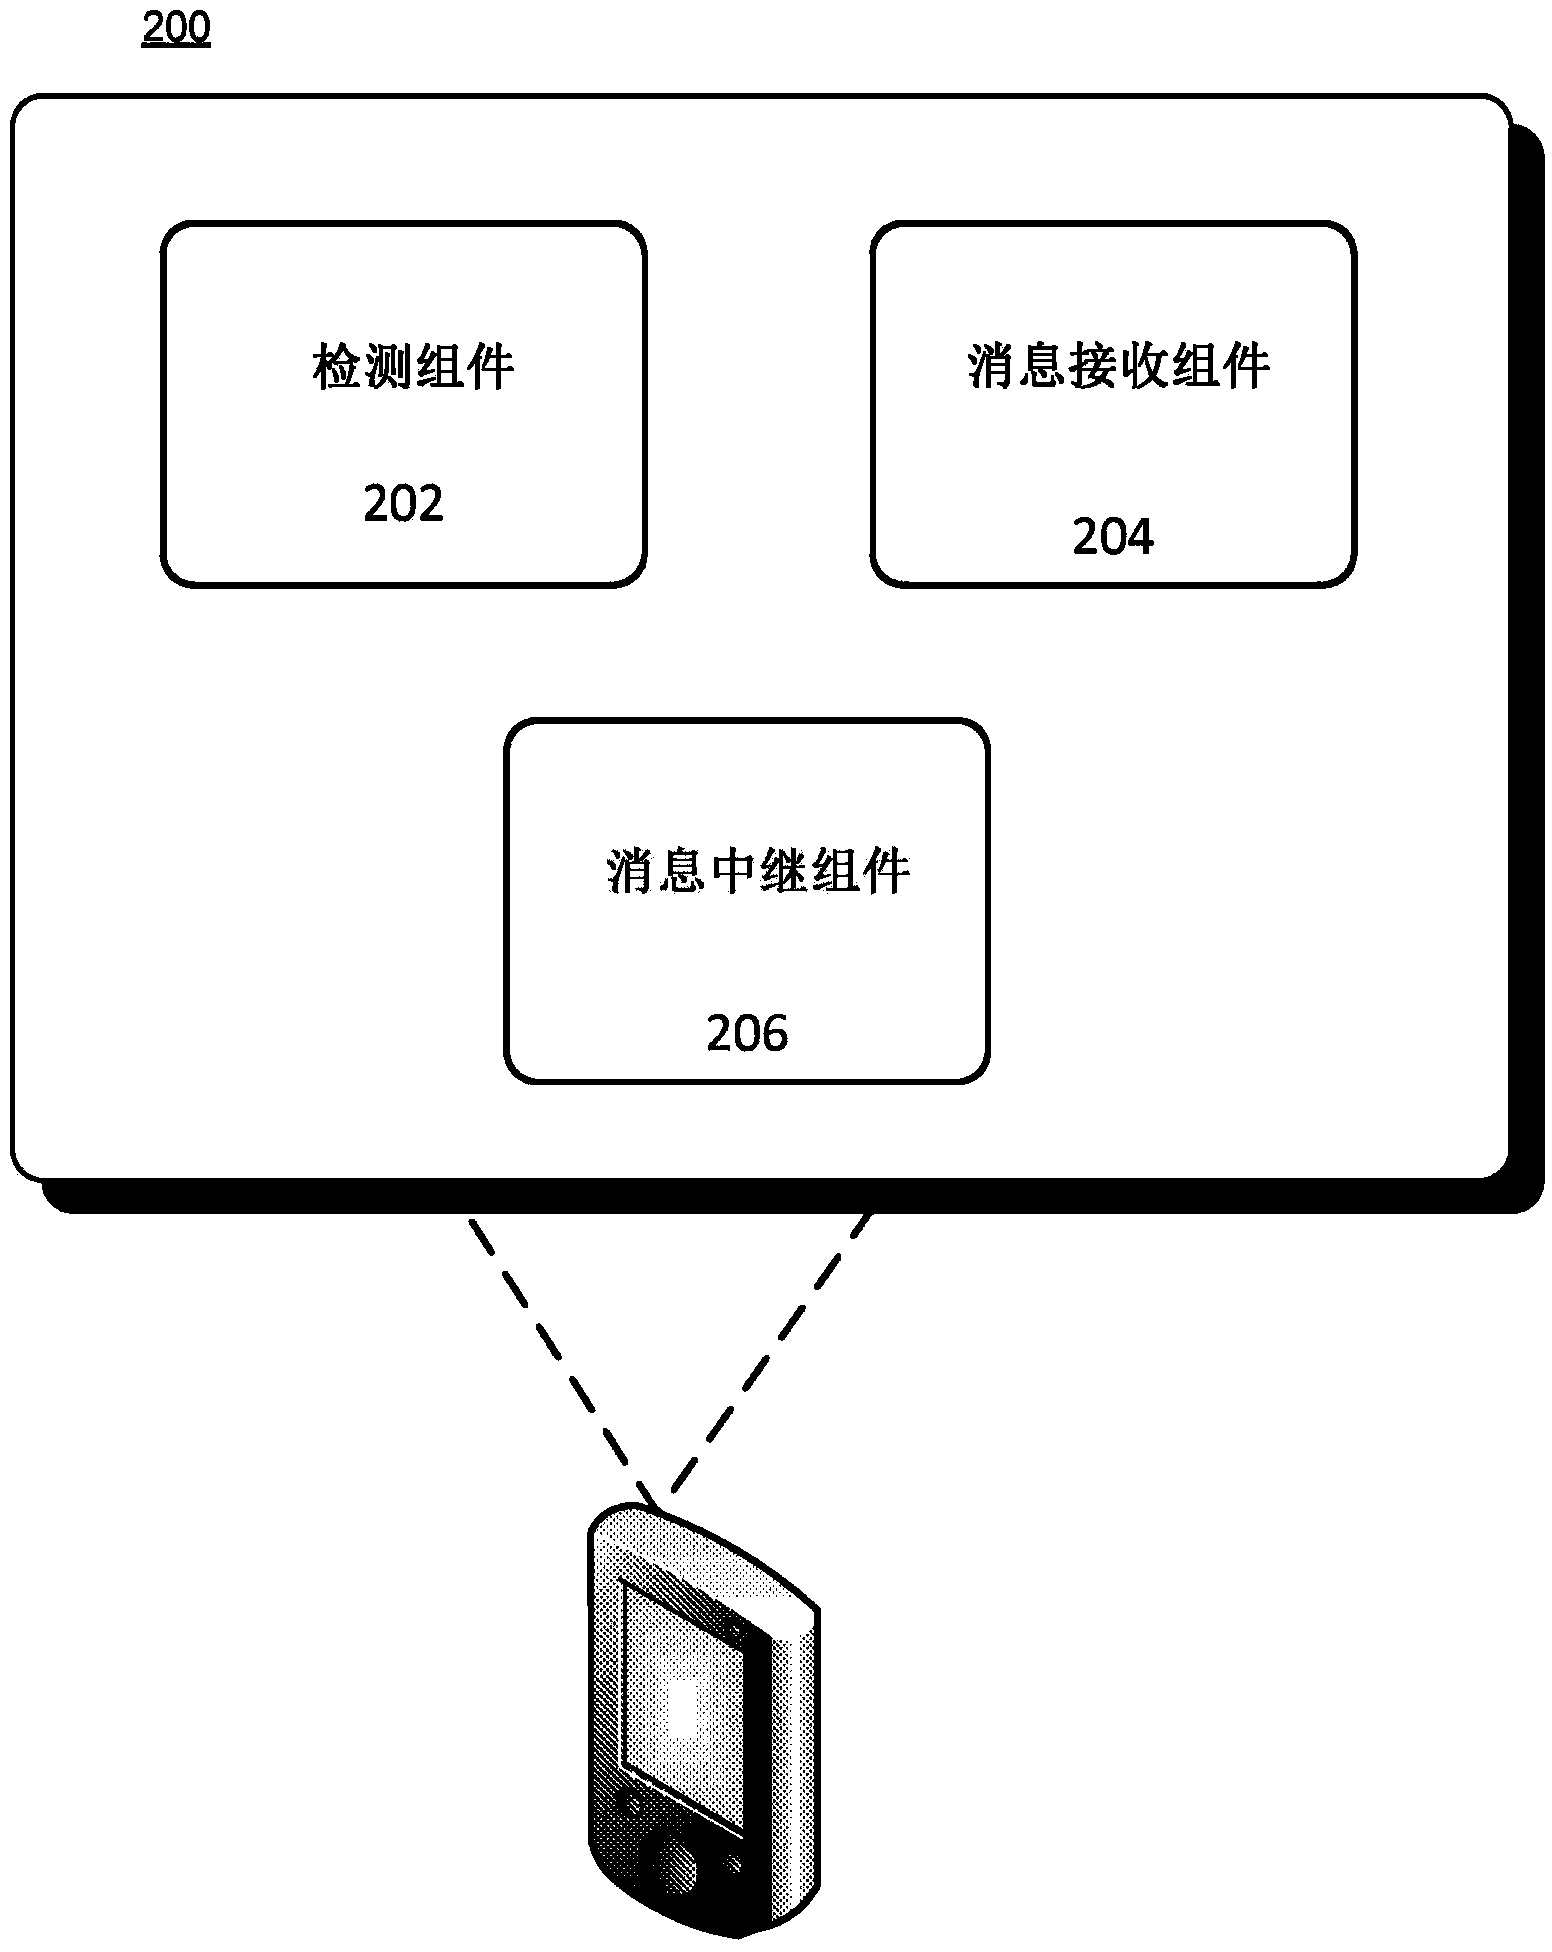 Digital relay for output of network devices